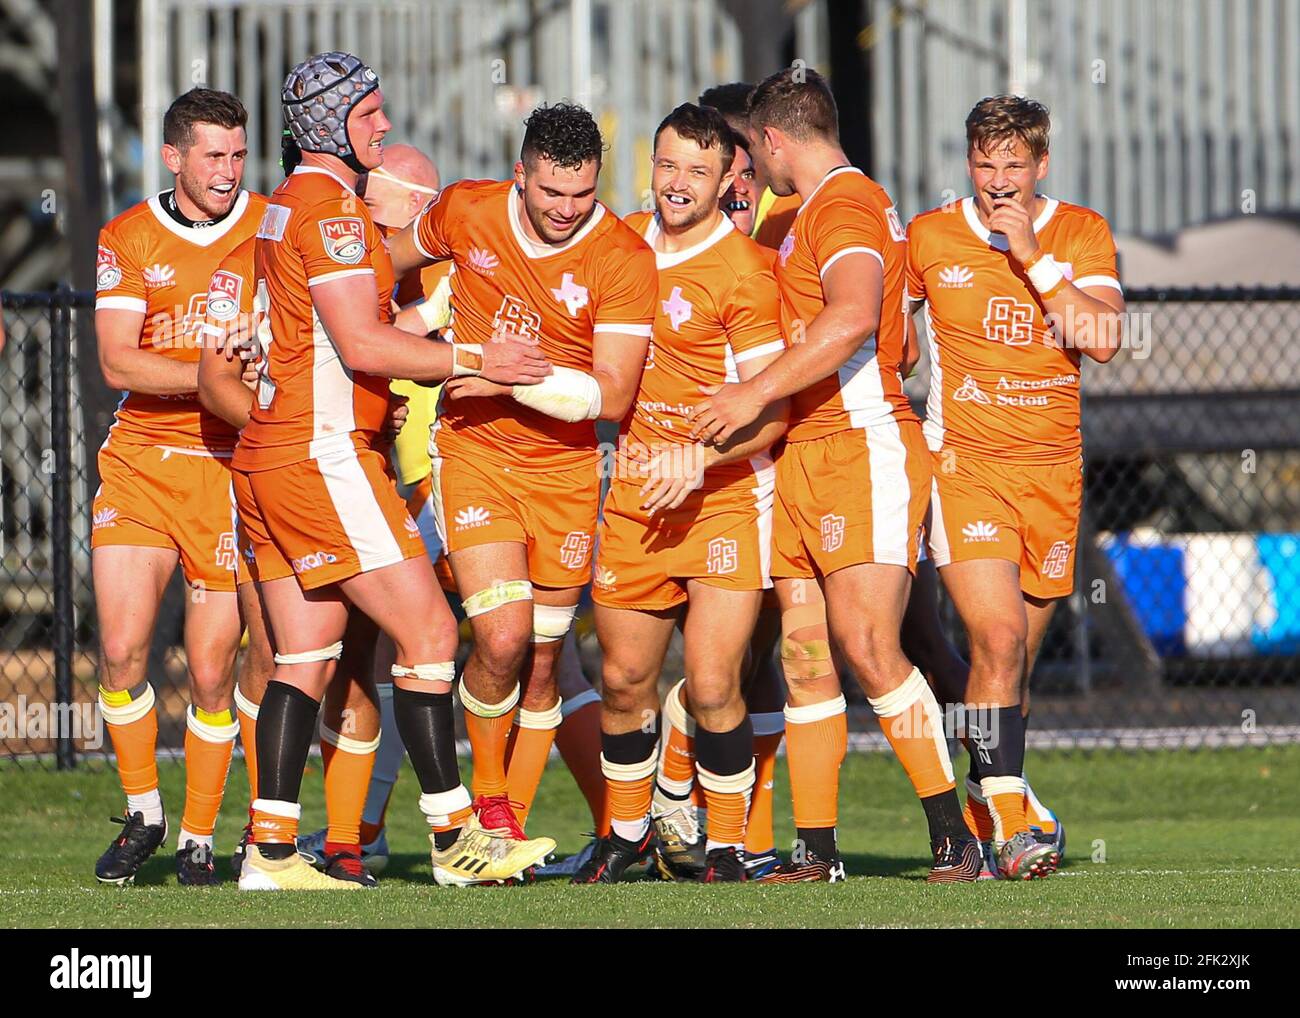 Austin, TX, USA. 25th Apr, 2021. The Austin Gilgronis celebrate after a successful try in a Major League Rugby match against the Seattle Seawolves on April 25, 2021 in Austin, Texas. Austin won, 42-15. Credit: Scott Coleman/ZUMA Wire/Alamy Live News Stock Photo